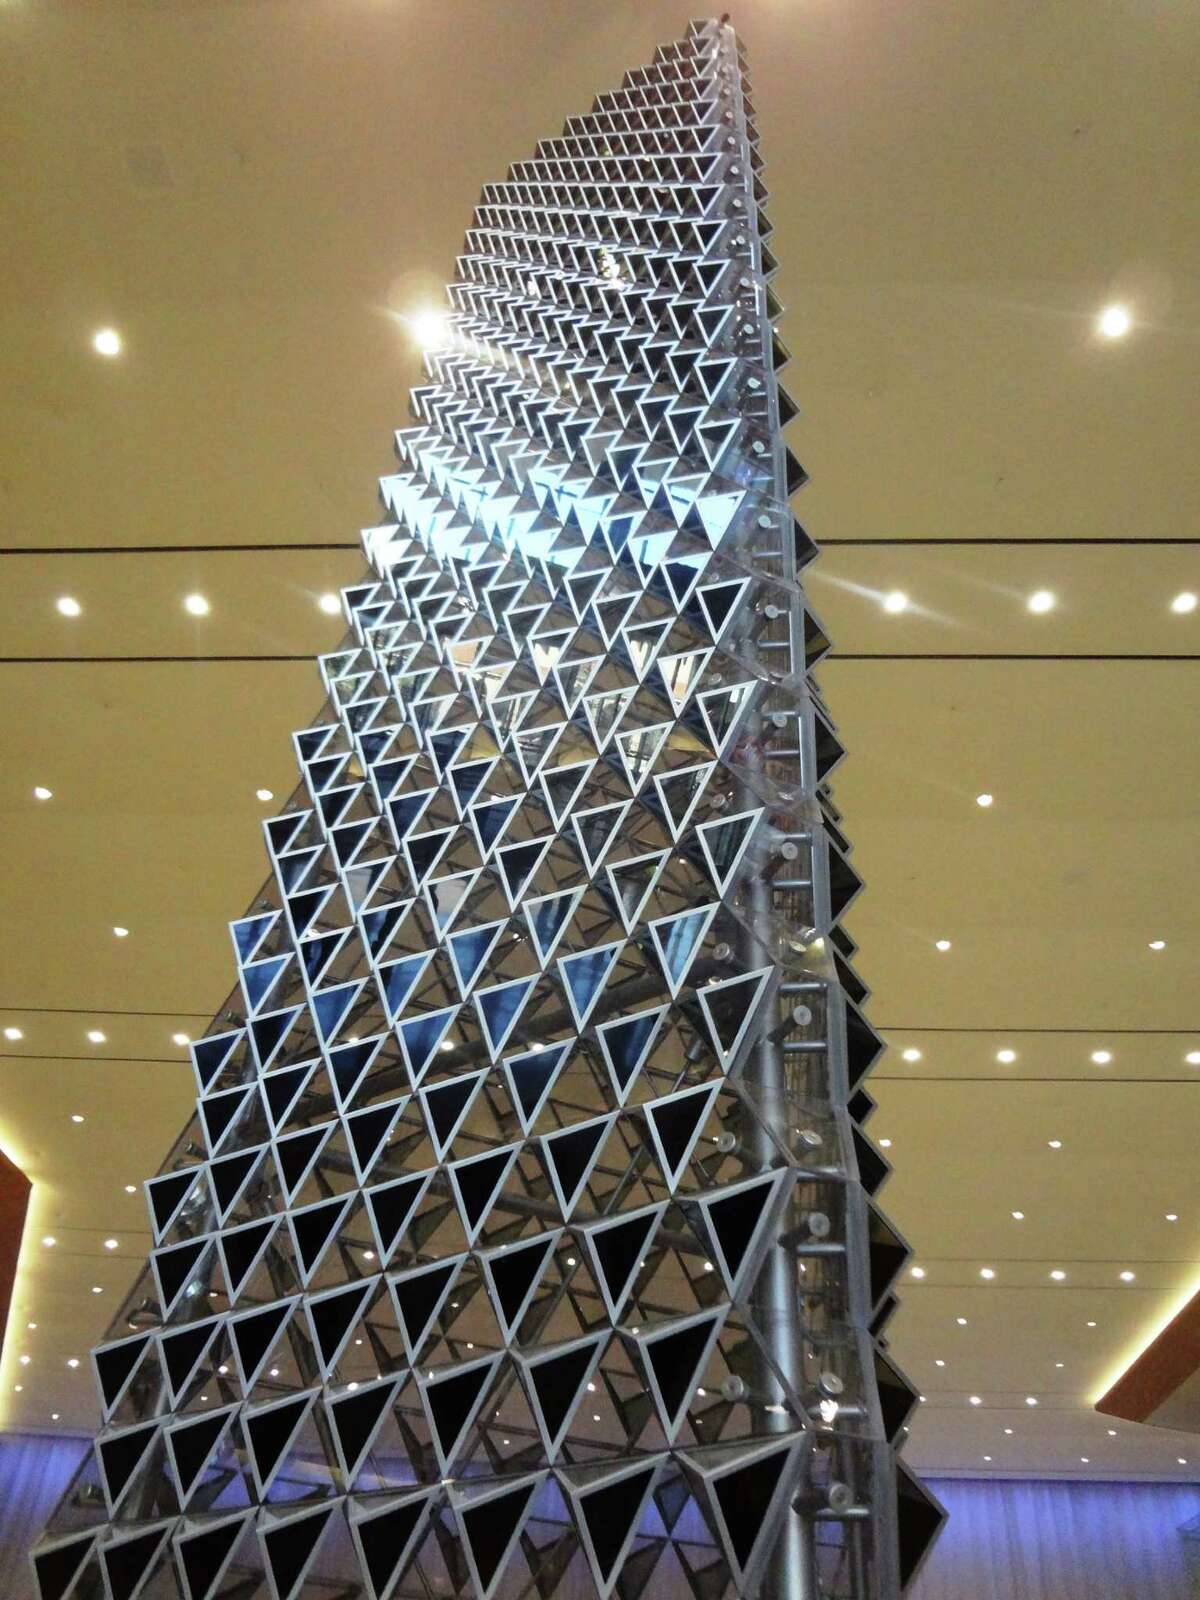 The centerpiece of the Convention Center lobby is an interactive sculptural tower called Liquid Crystal by the London-based Jason Bruges Studio. It's $1 million price tag has caused controversy.